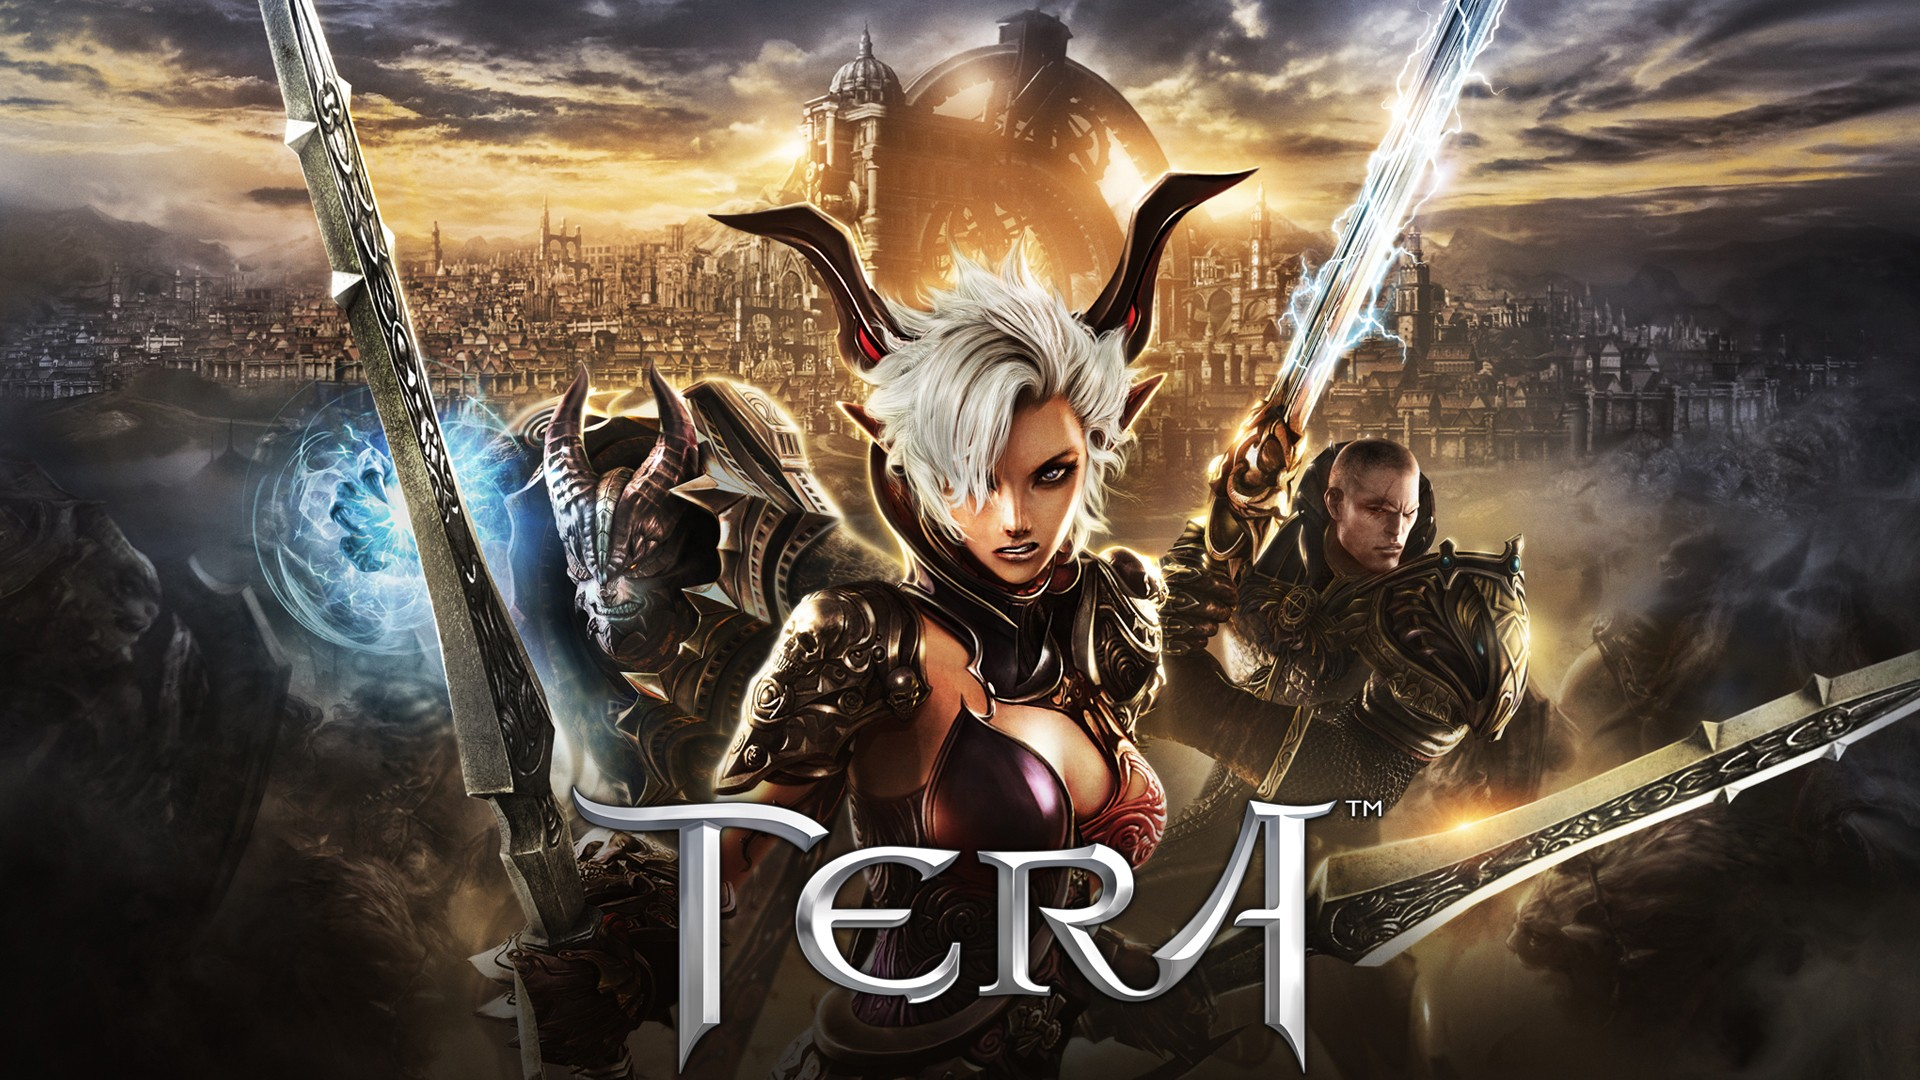 1920x1080 100+ Tera HD Wallpapers and Backgrounds